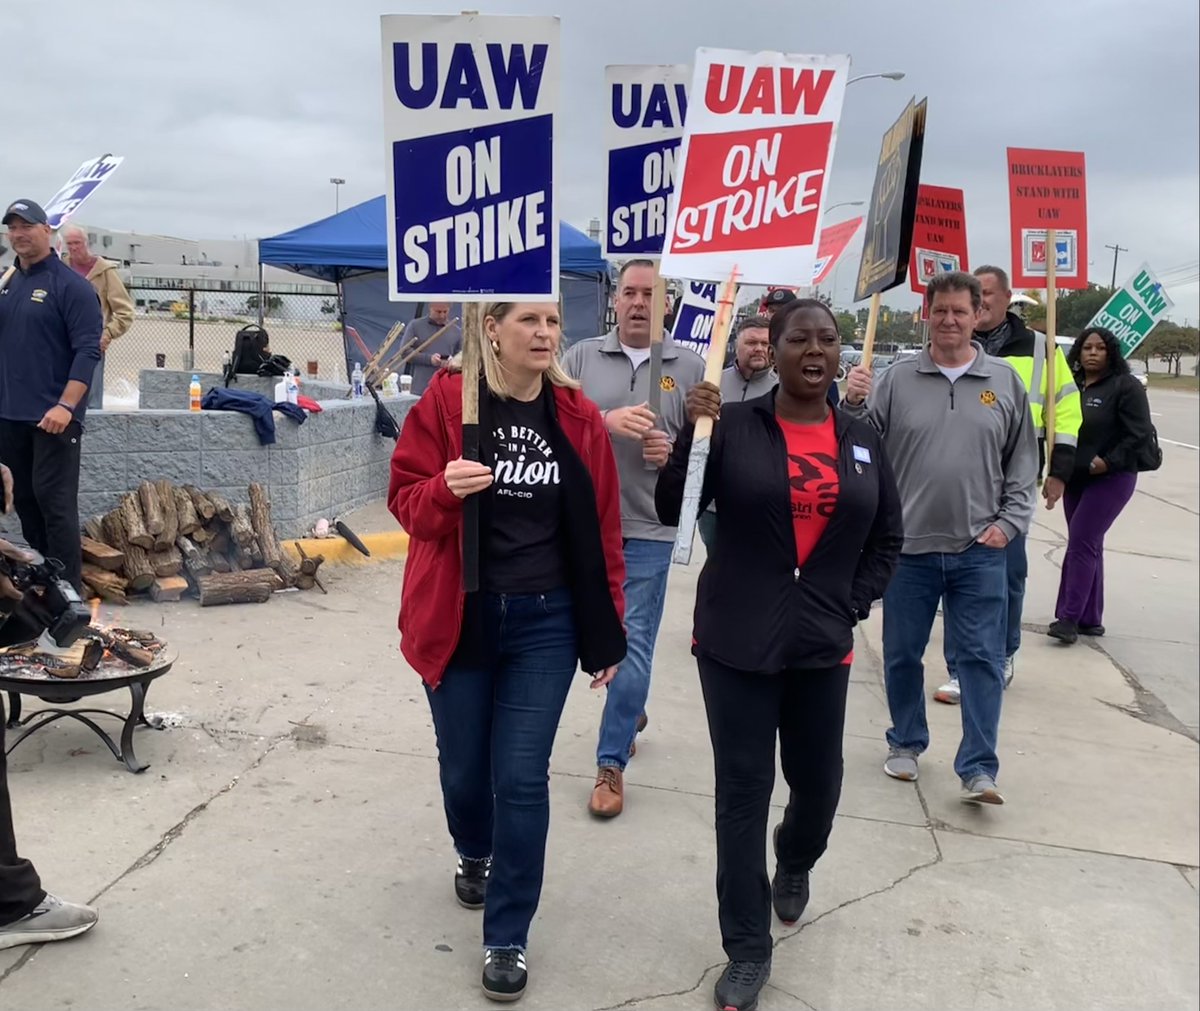 Striking @UAW auto workers are demanding a share in the wealth they help create! #StandUpUAW